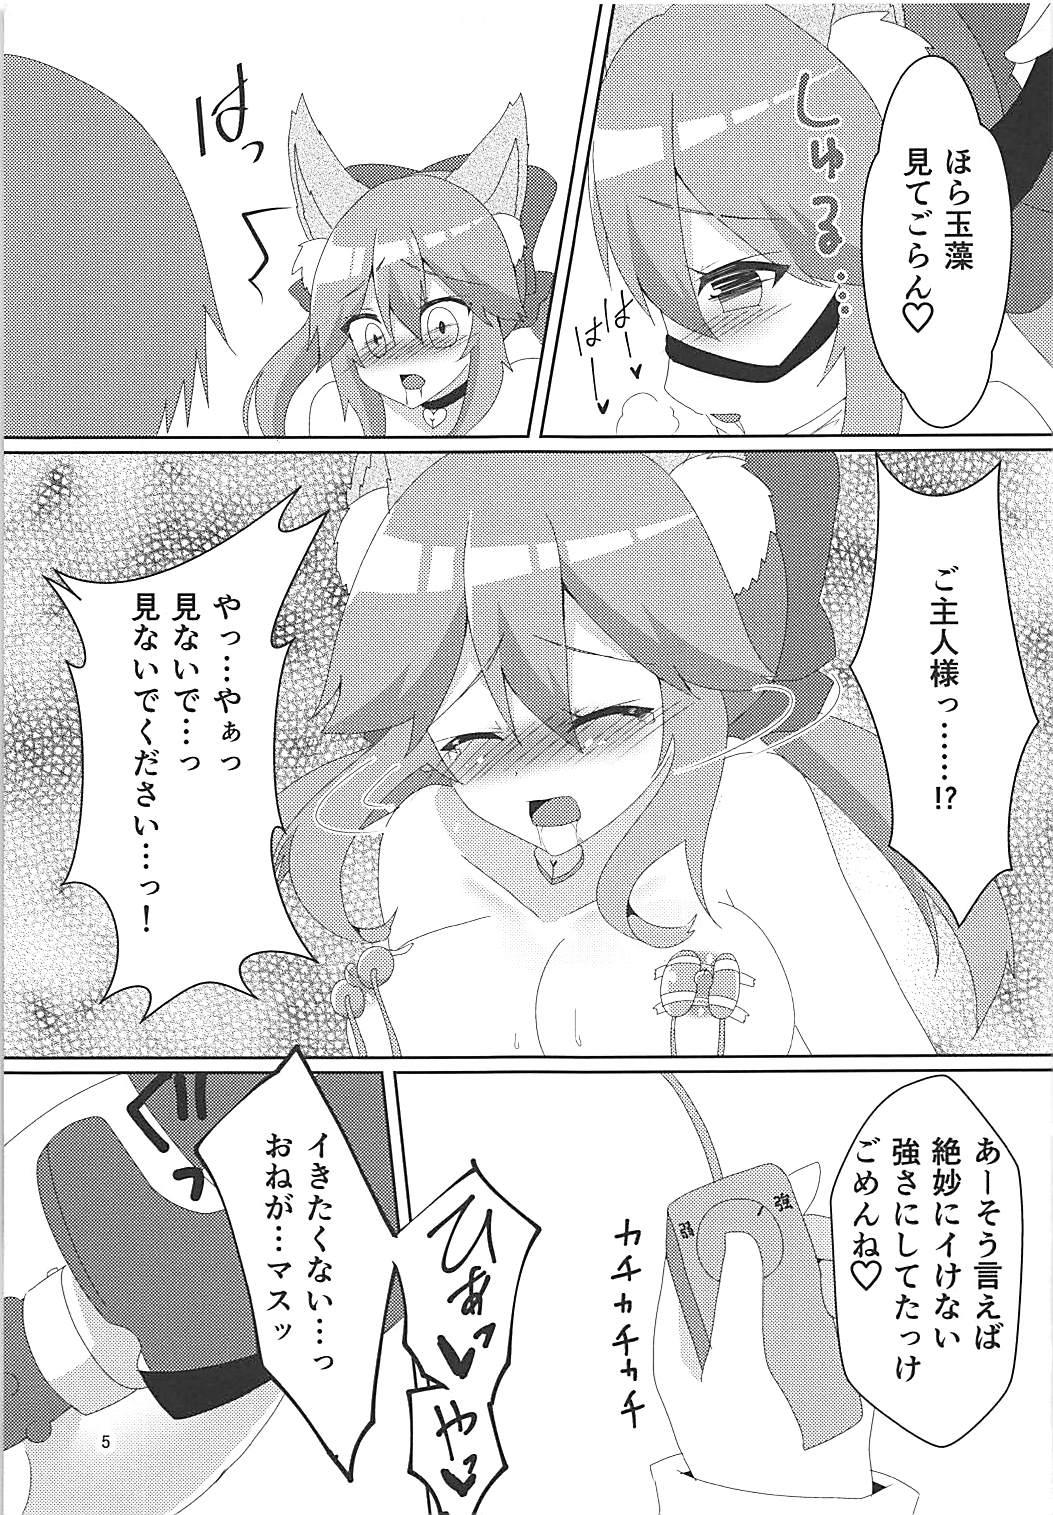 Mulher NTRTMM - Fate grand order Linda - Page 6